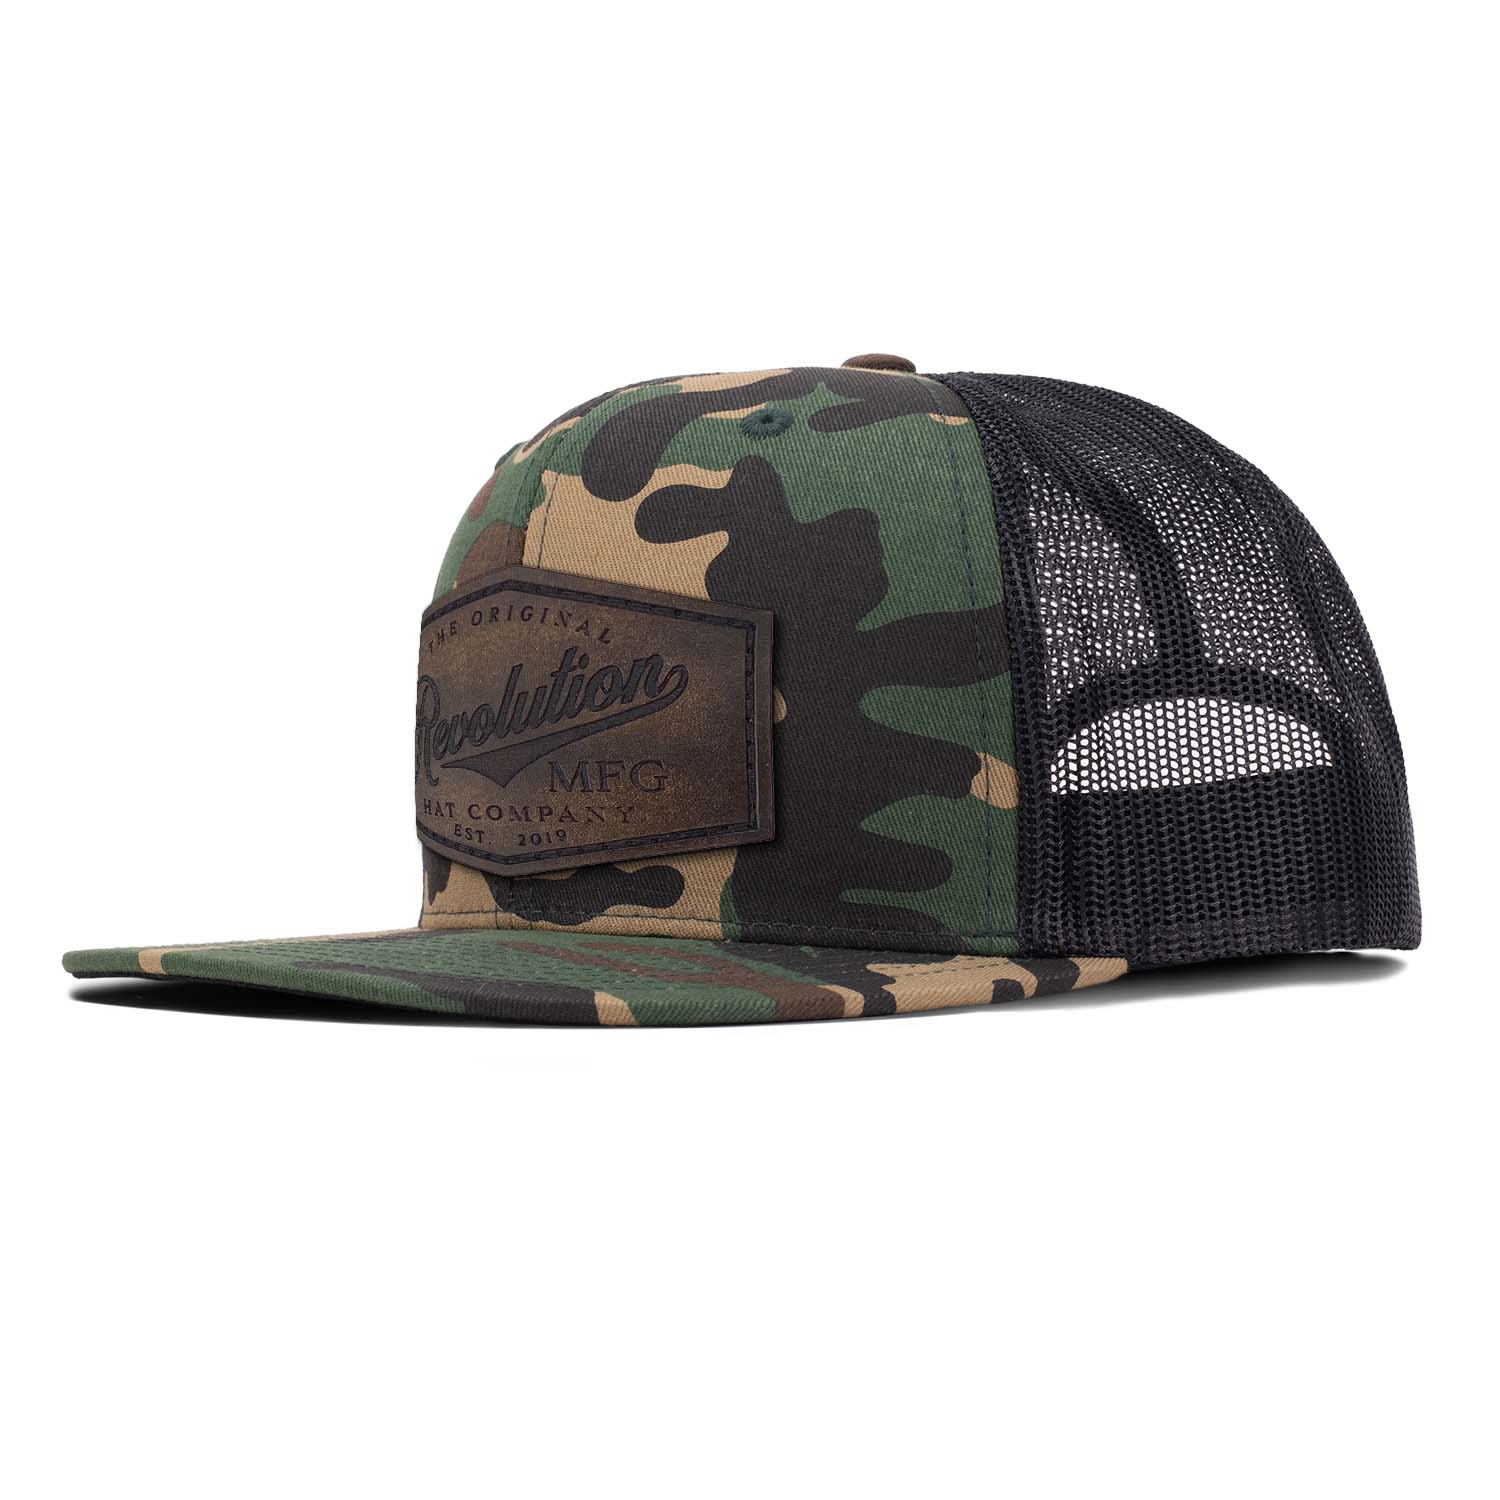 Revolution Mfg flat bill trucker hat in woodland camo and black mesh with a brown full grain leather Revolution Hat Co patch